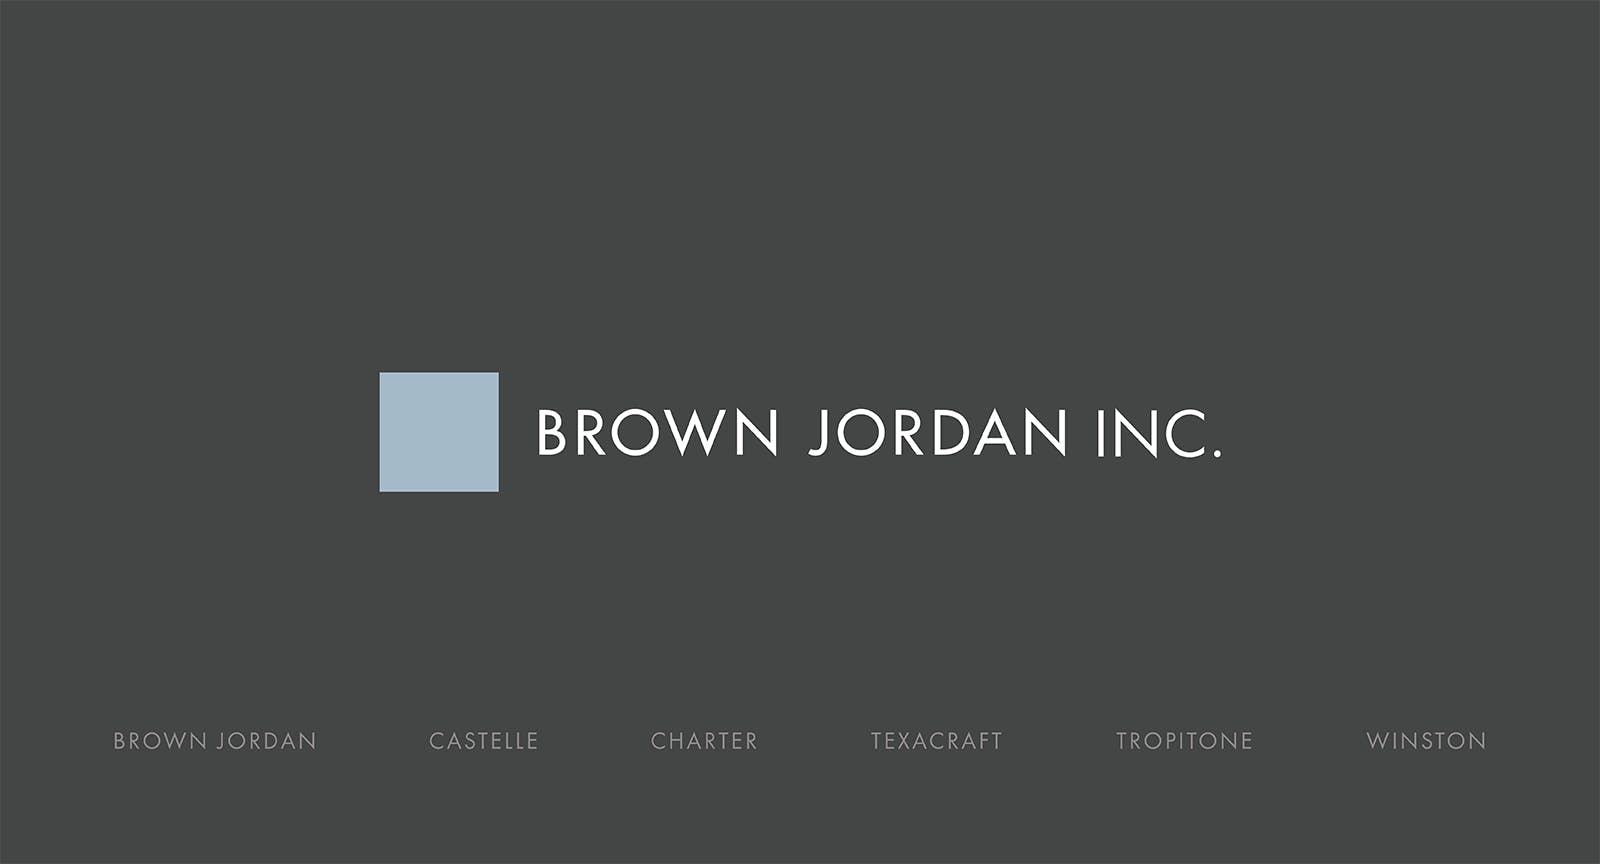 BROWN JORDAN INCORPORATED’S RESPONSE TO COVID-19